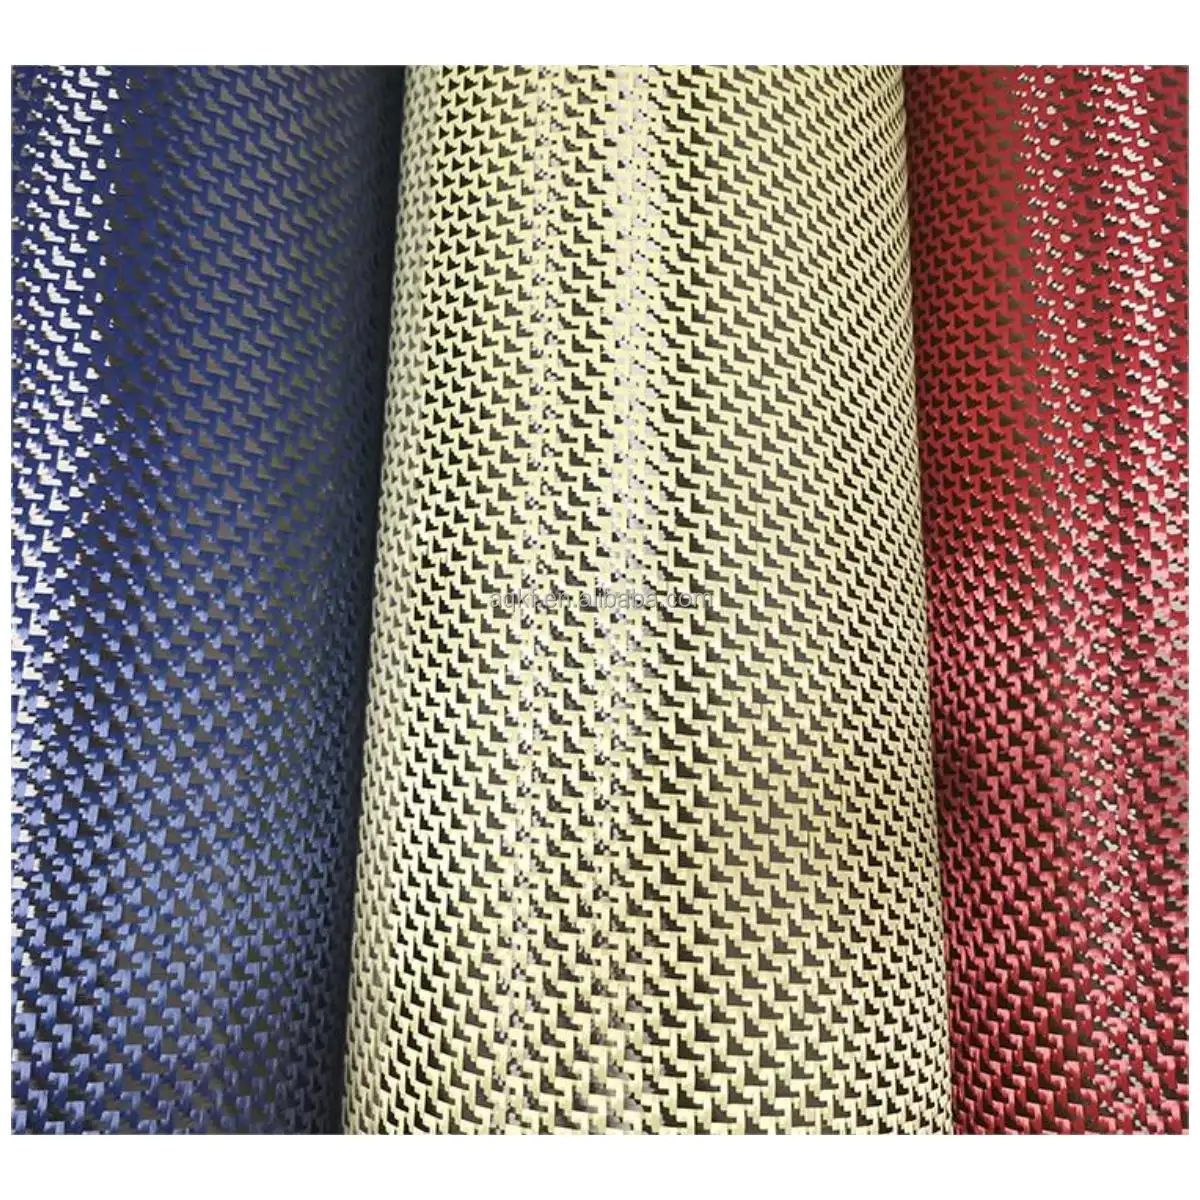 3K280G carbon aramid fiber blended woven fabric aircraft jacquard pattern parts modified DIY surface decoration fabric